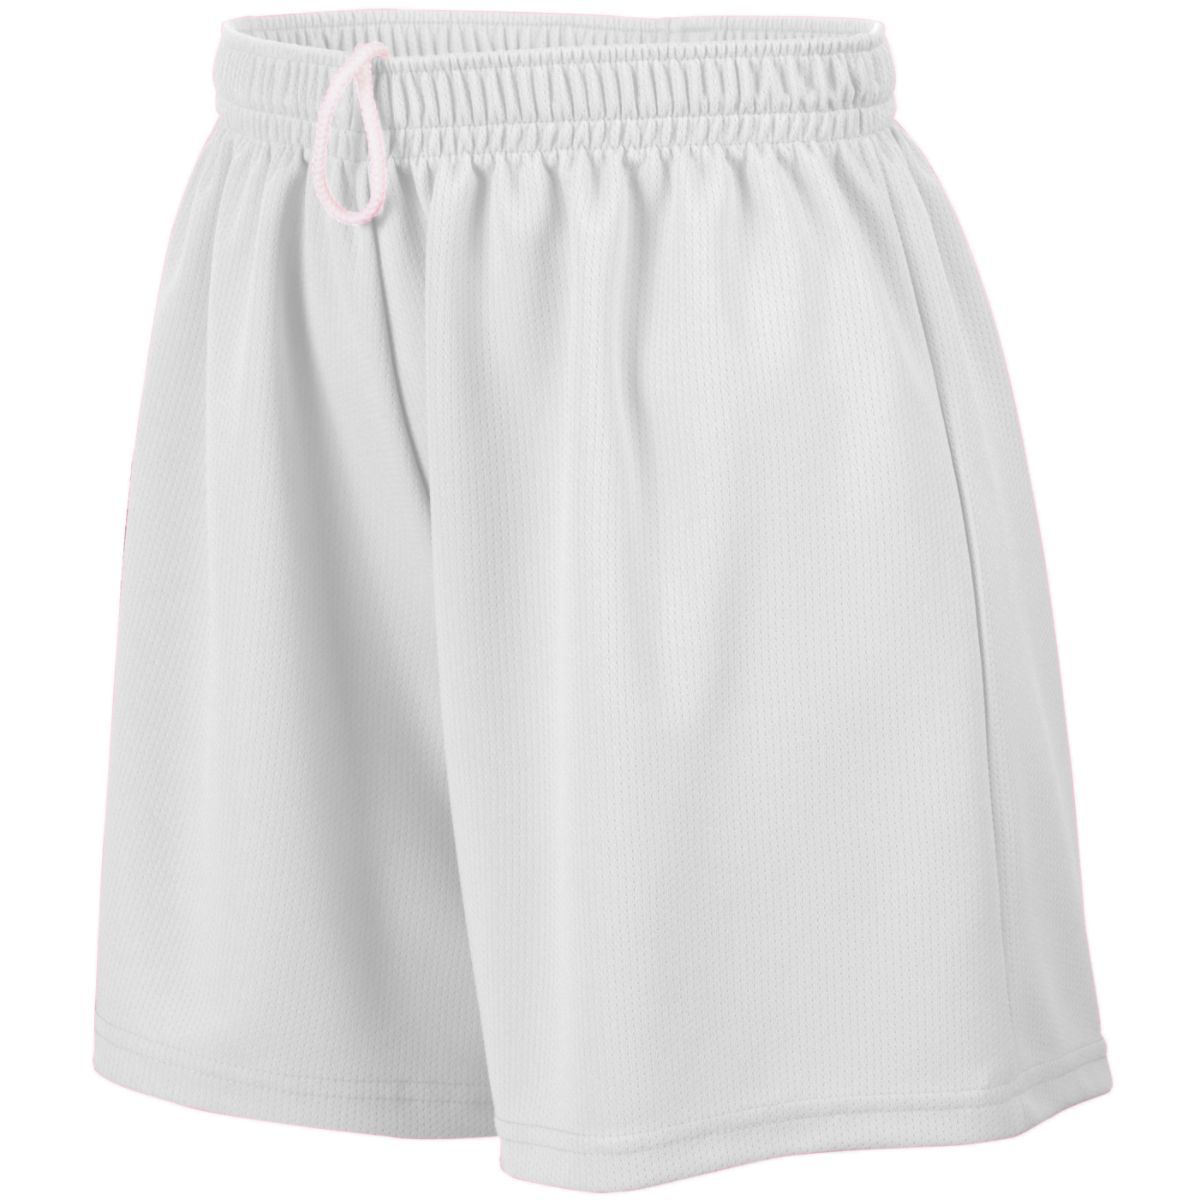 Augusta Sportswear Ladies Wicking Mesh Shorts in White  -Part of the Ladies, Ladies-Shorts, Augusta-Products, Lacrosse, All-Sports, All-Sports-1 product lines at KanaleyCreations.com